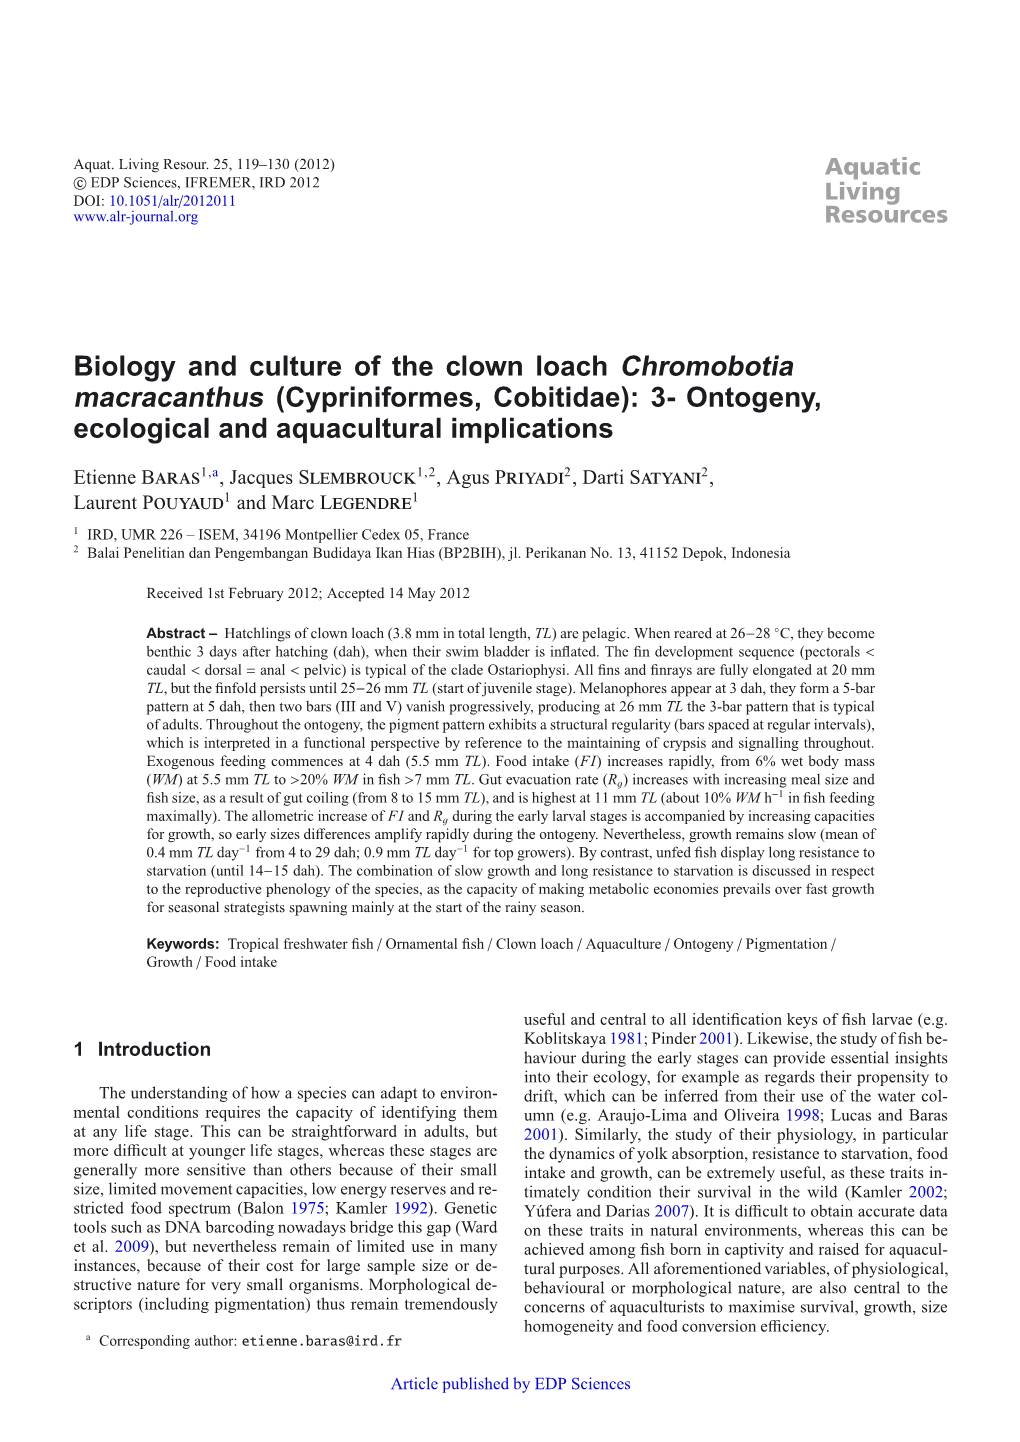 Biology and Culture of the Clown Loach Chromobotia Macracanthus (Cypriniformes, Cobitidae): 3- Ontogeny, Ecological and Aquacultural Implications